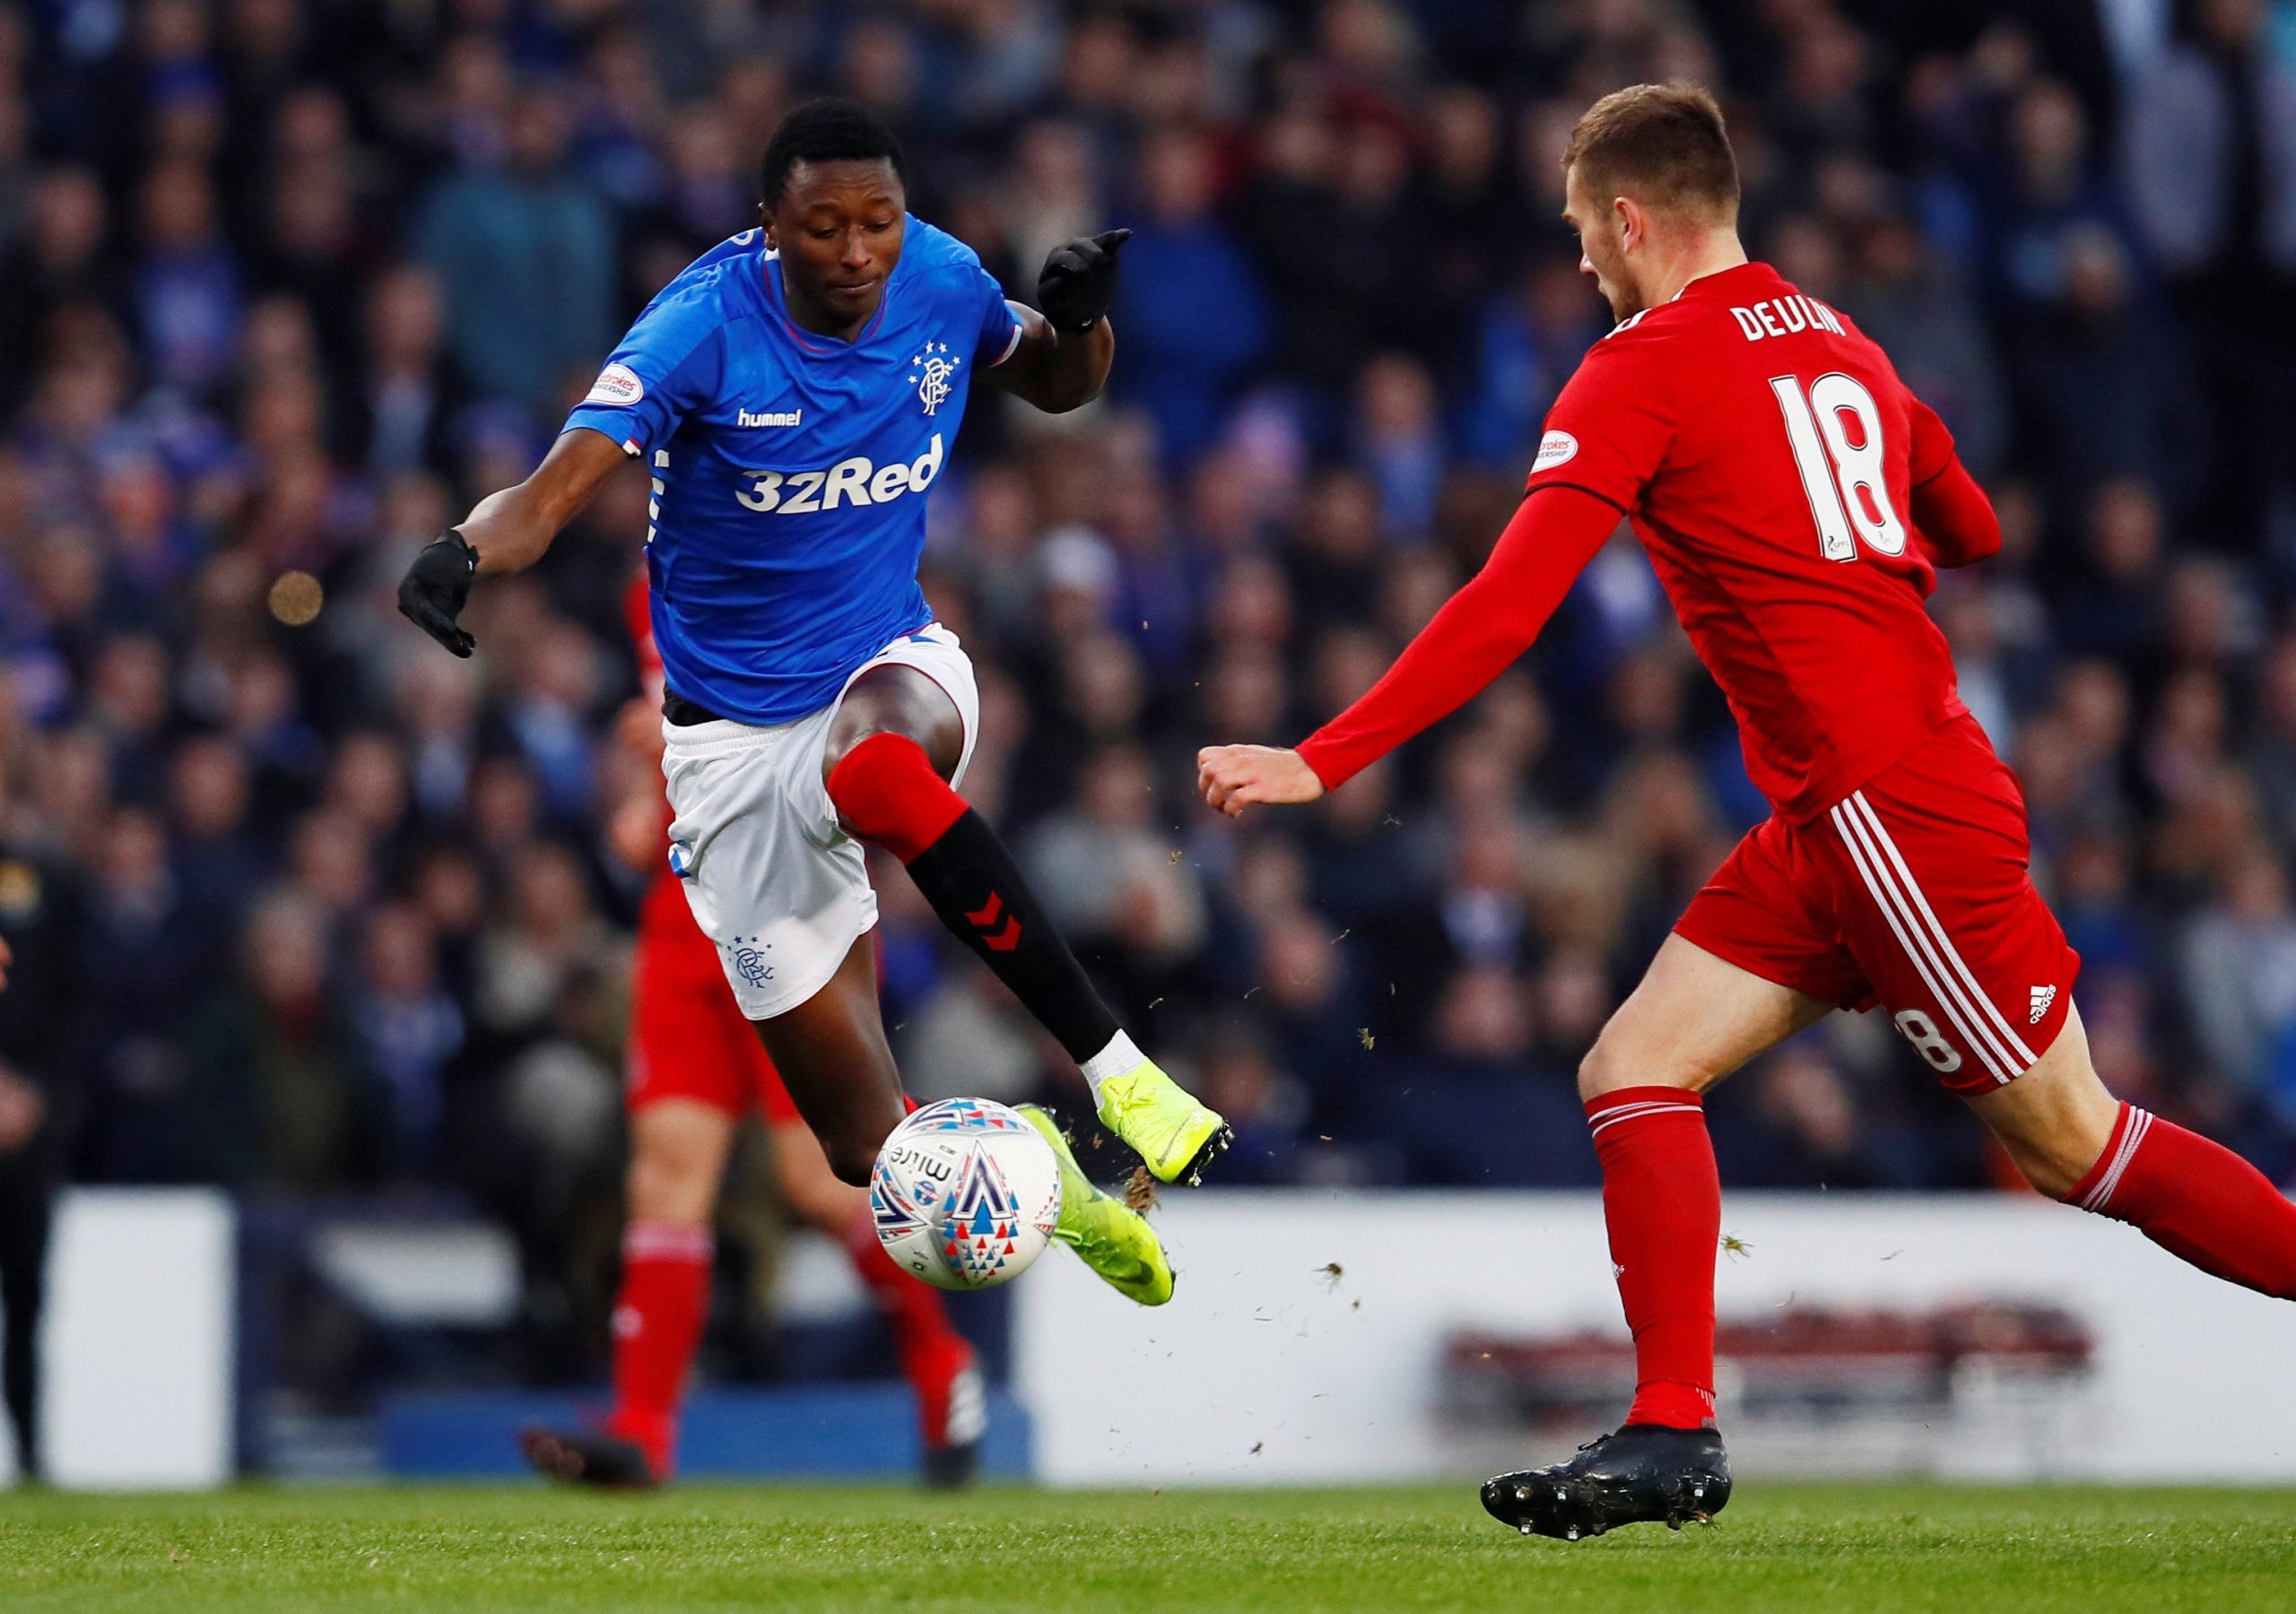 Soccer Football - Scottish League Cup Semi Final - Aberdeen v Rangers - Hampden Park, Glasgow, Britain - October 28, 2018  Rangers' Sadiq Umar in action with Aberdeen's Michael Devlin          Action Images via Reuters/Jason Cairnduff  EDITORIAL USE ONLY. No use with unauthorized audio, video, data, fixture lists, club/league logos or 